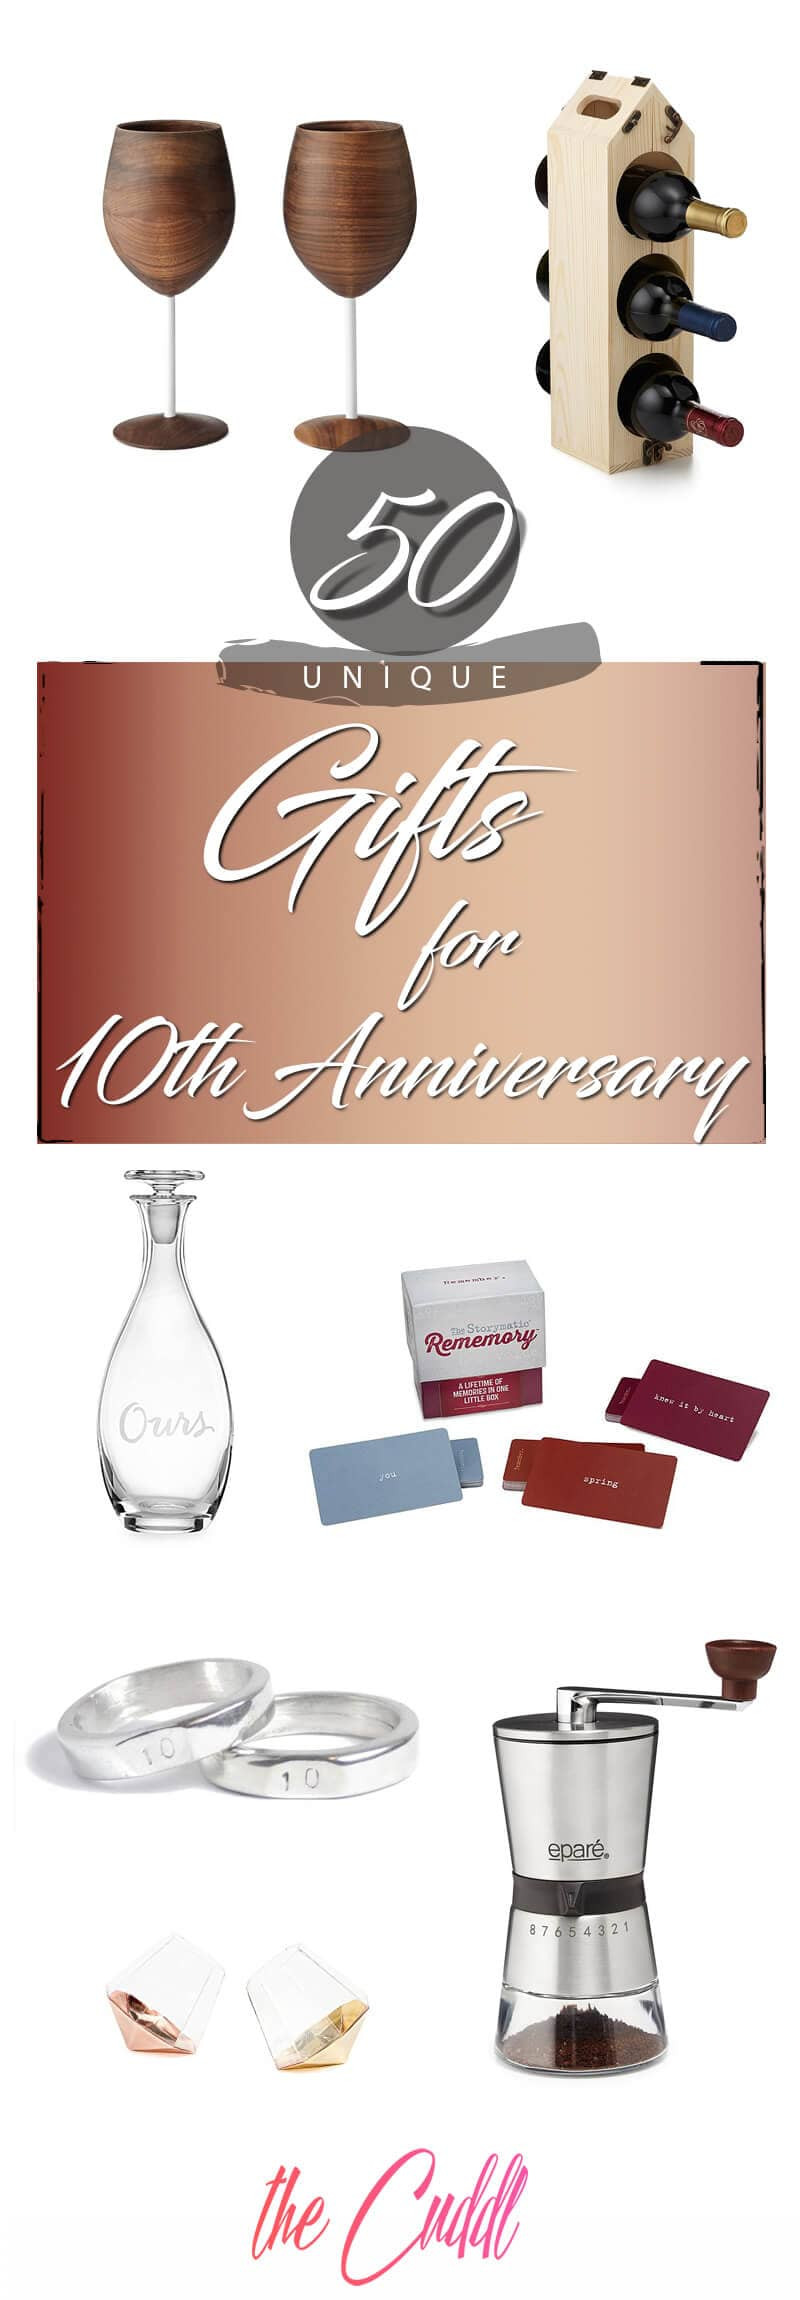 10 Yr Anniversary Gift Ideas
 50 Best 10 Year Anniversary Gift Ideas that They Will